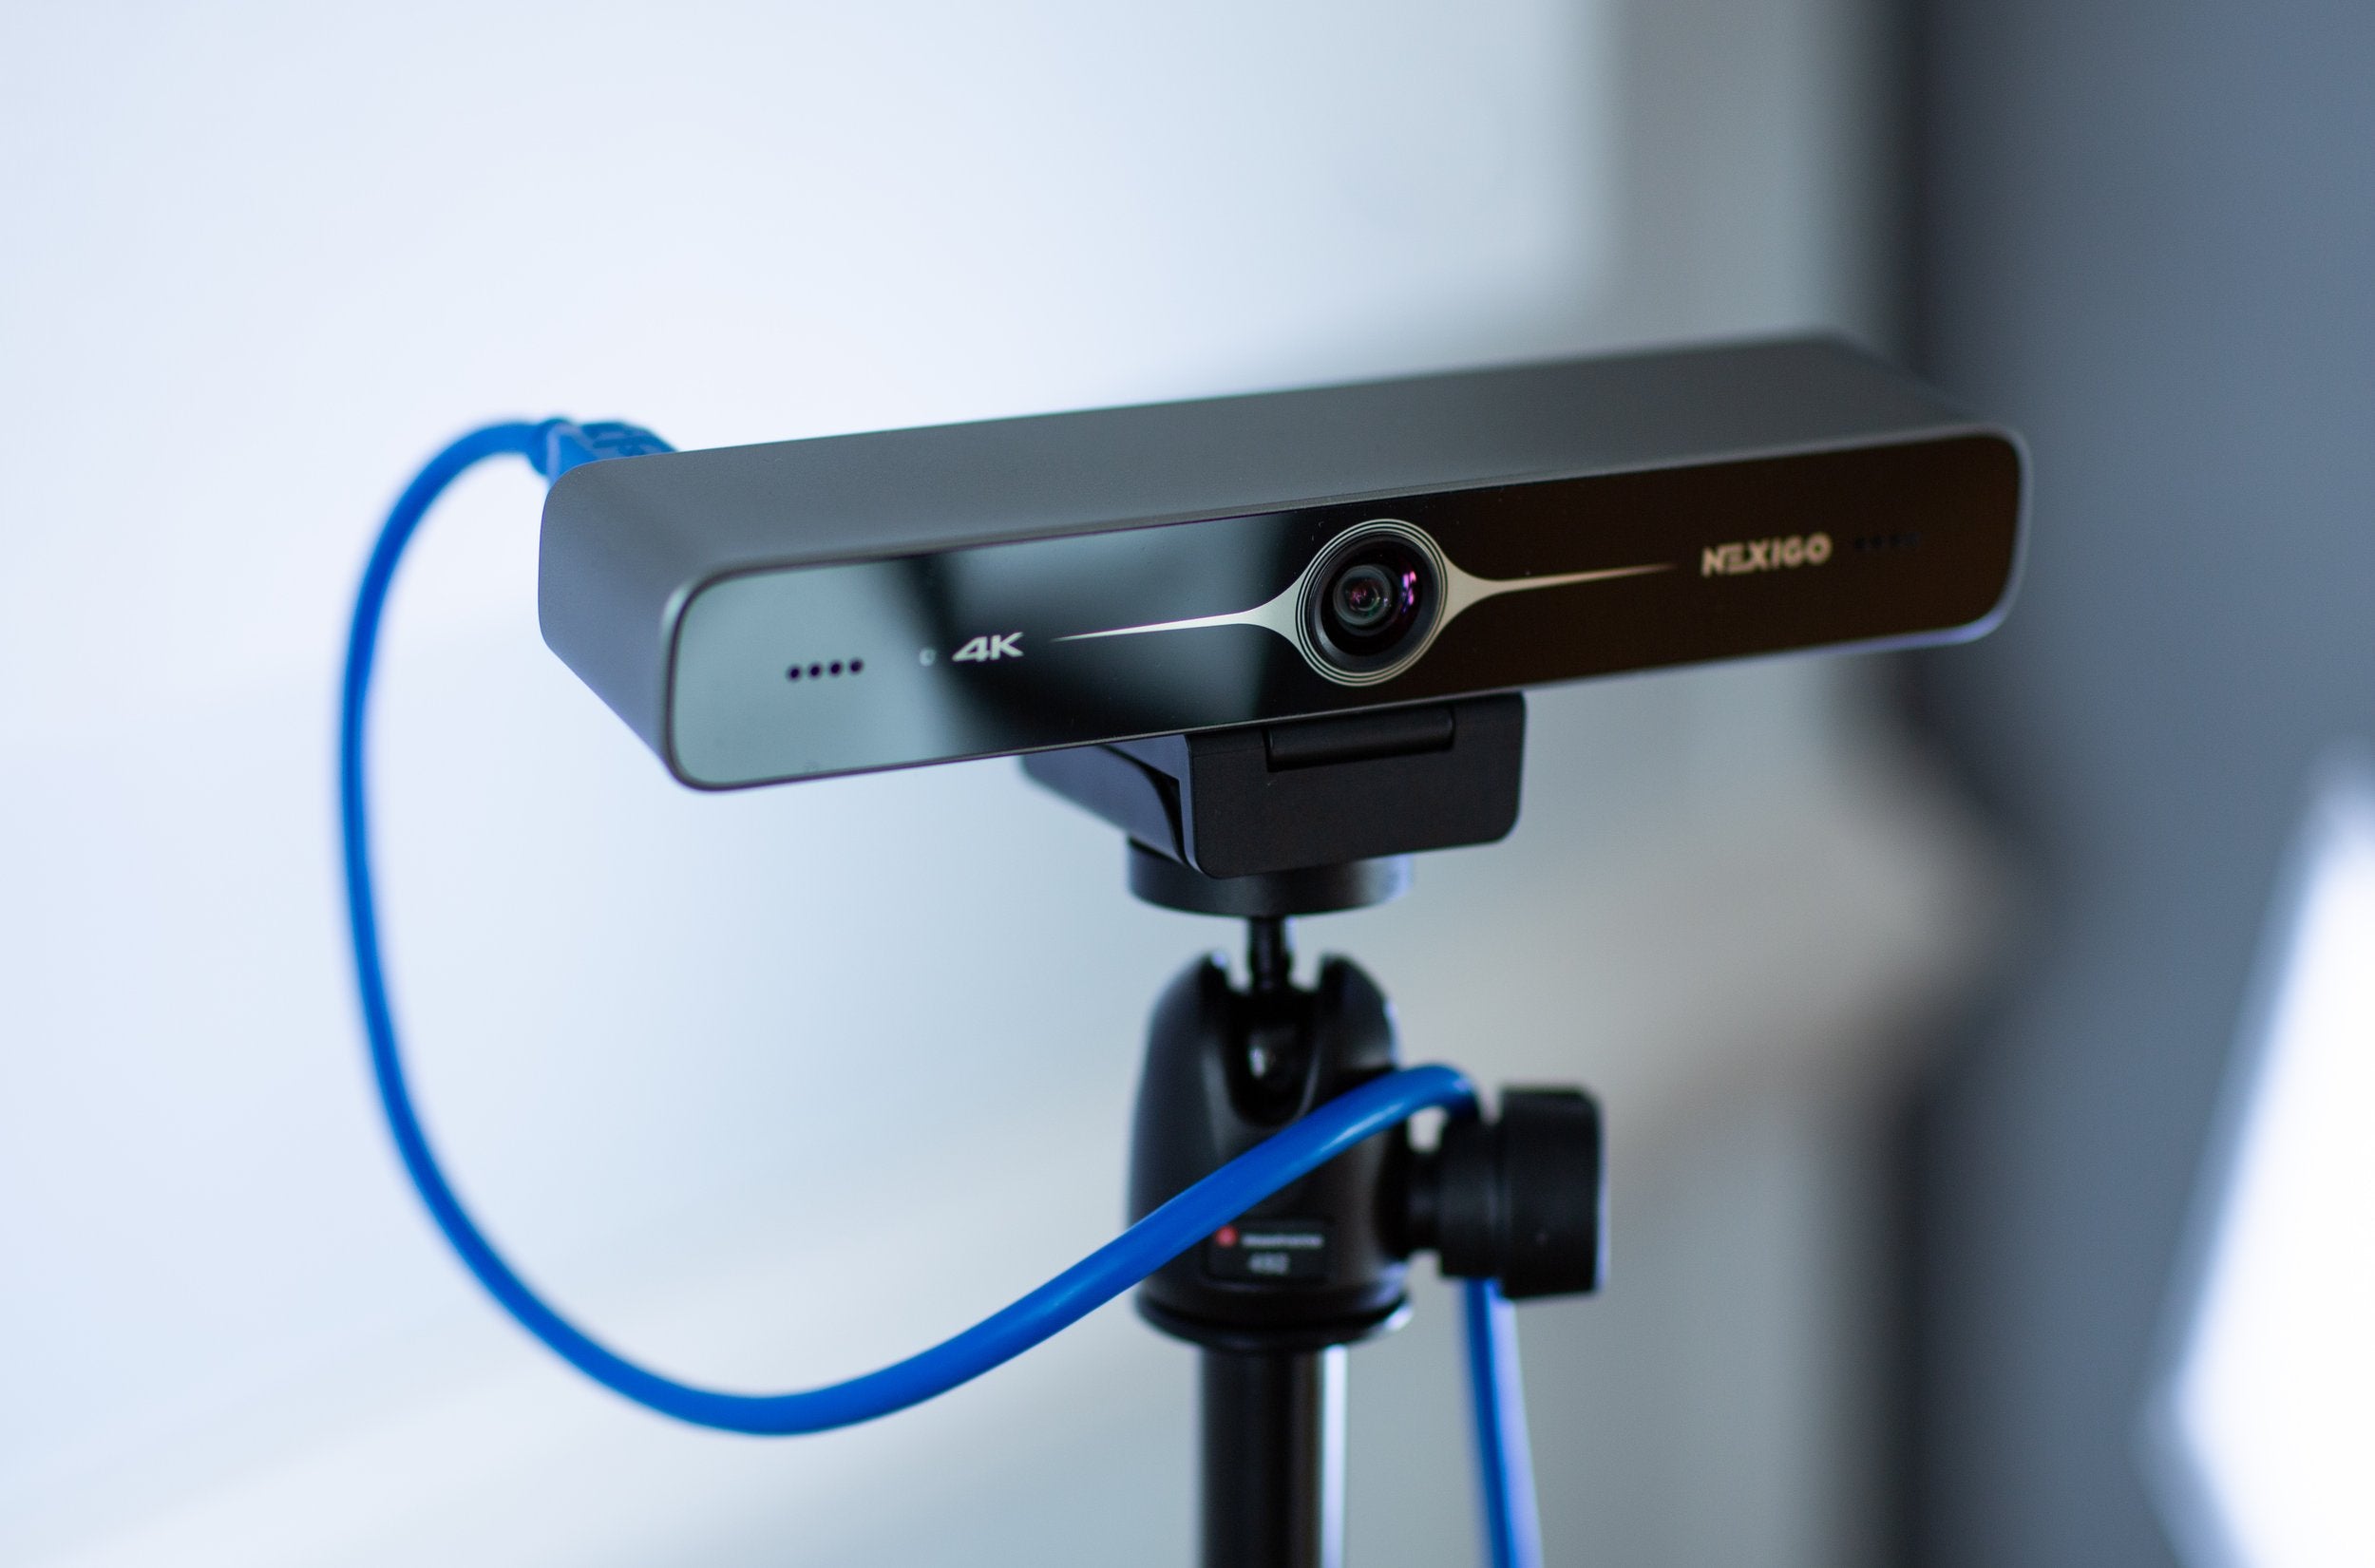 Creative Live! Cam Sync 4K review: A 4K webcam for way, way less